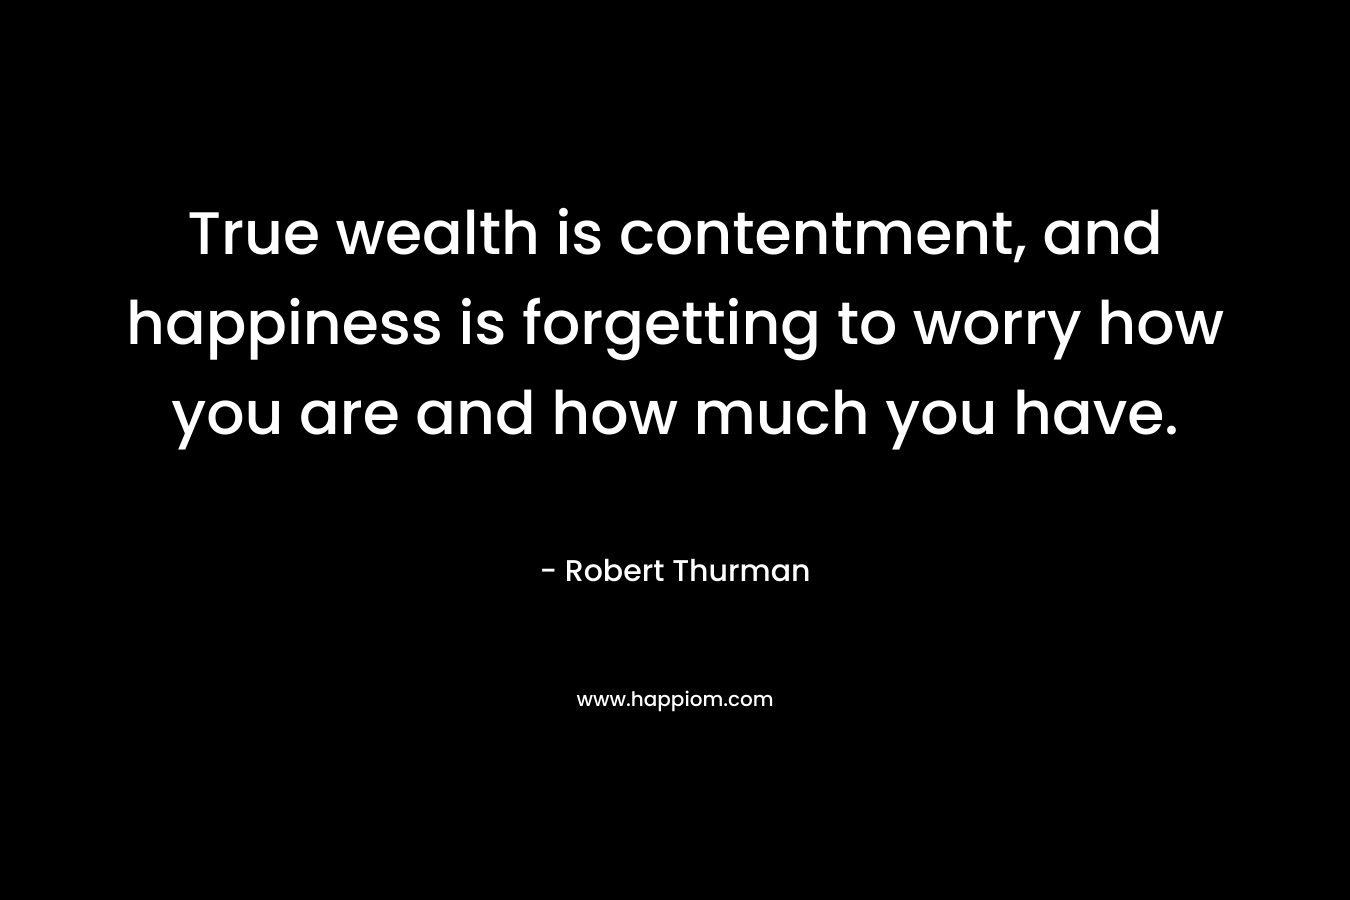 True wealth is contentment, and happiness is forgetting to worry how you are and how much you have.